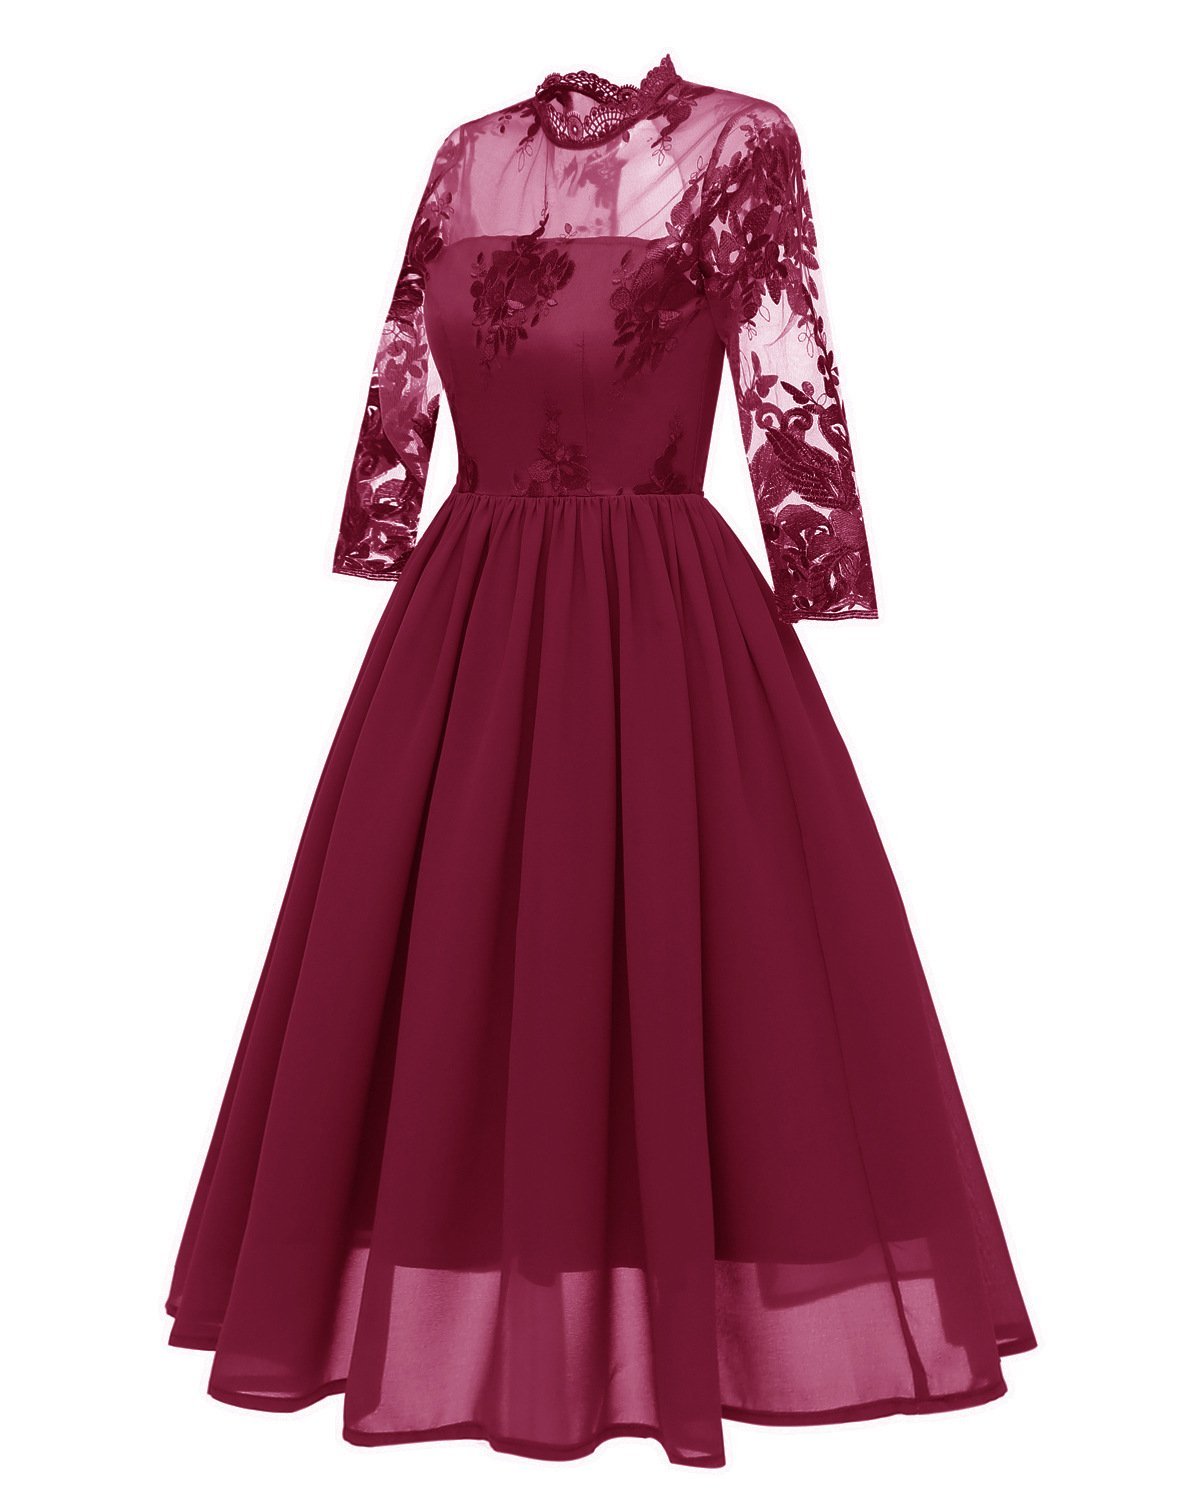 US$ 38.67 - New Banquet Evening Dress Female Shinning Sexy embroidery ...